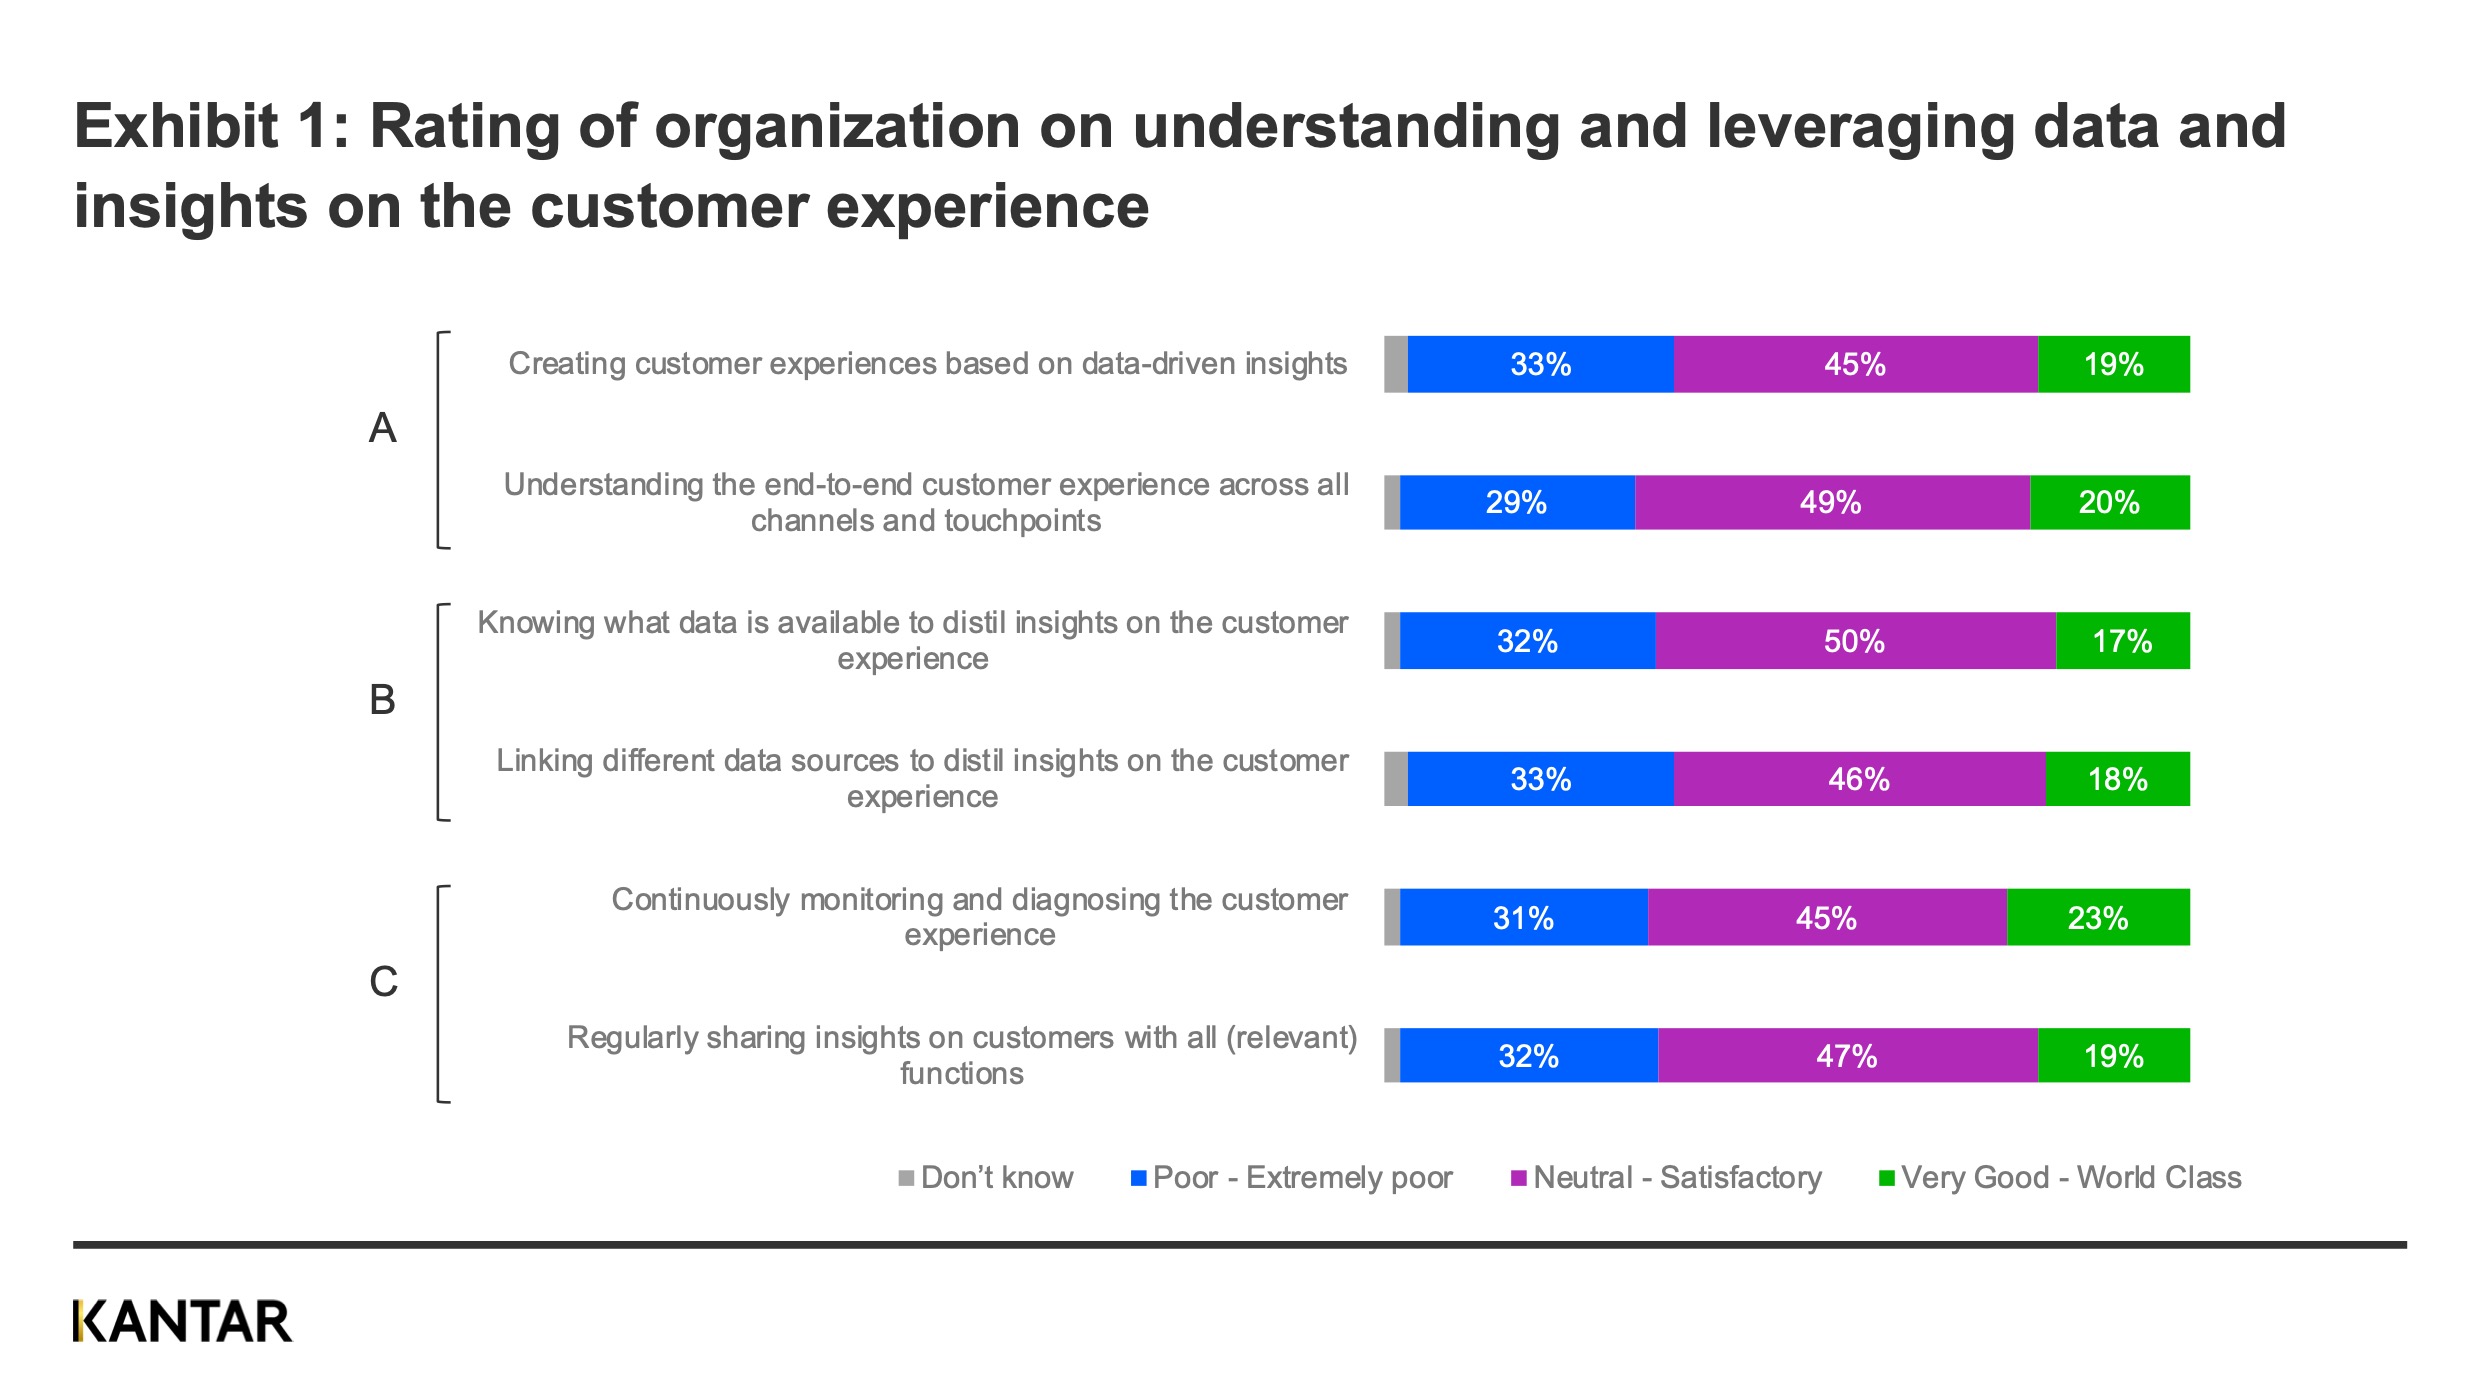 Rating understanding and leveraging data on cx